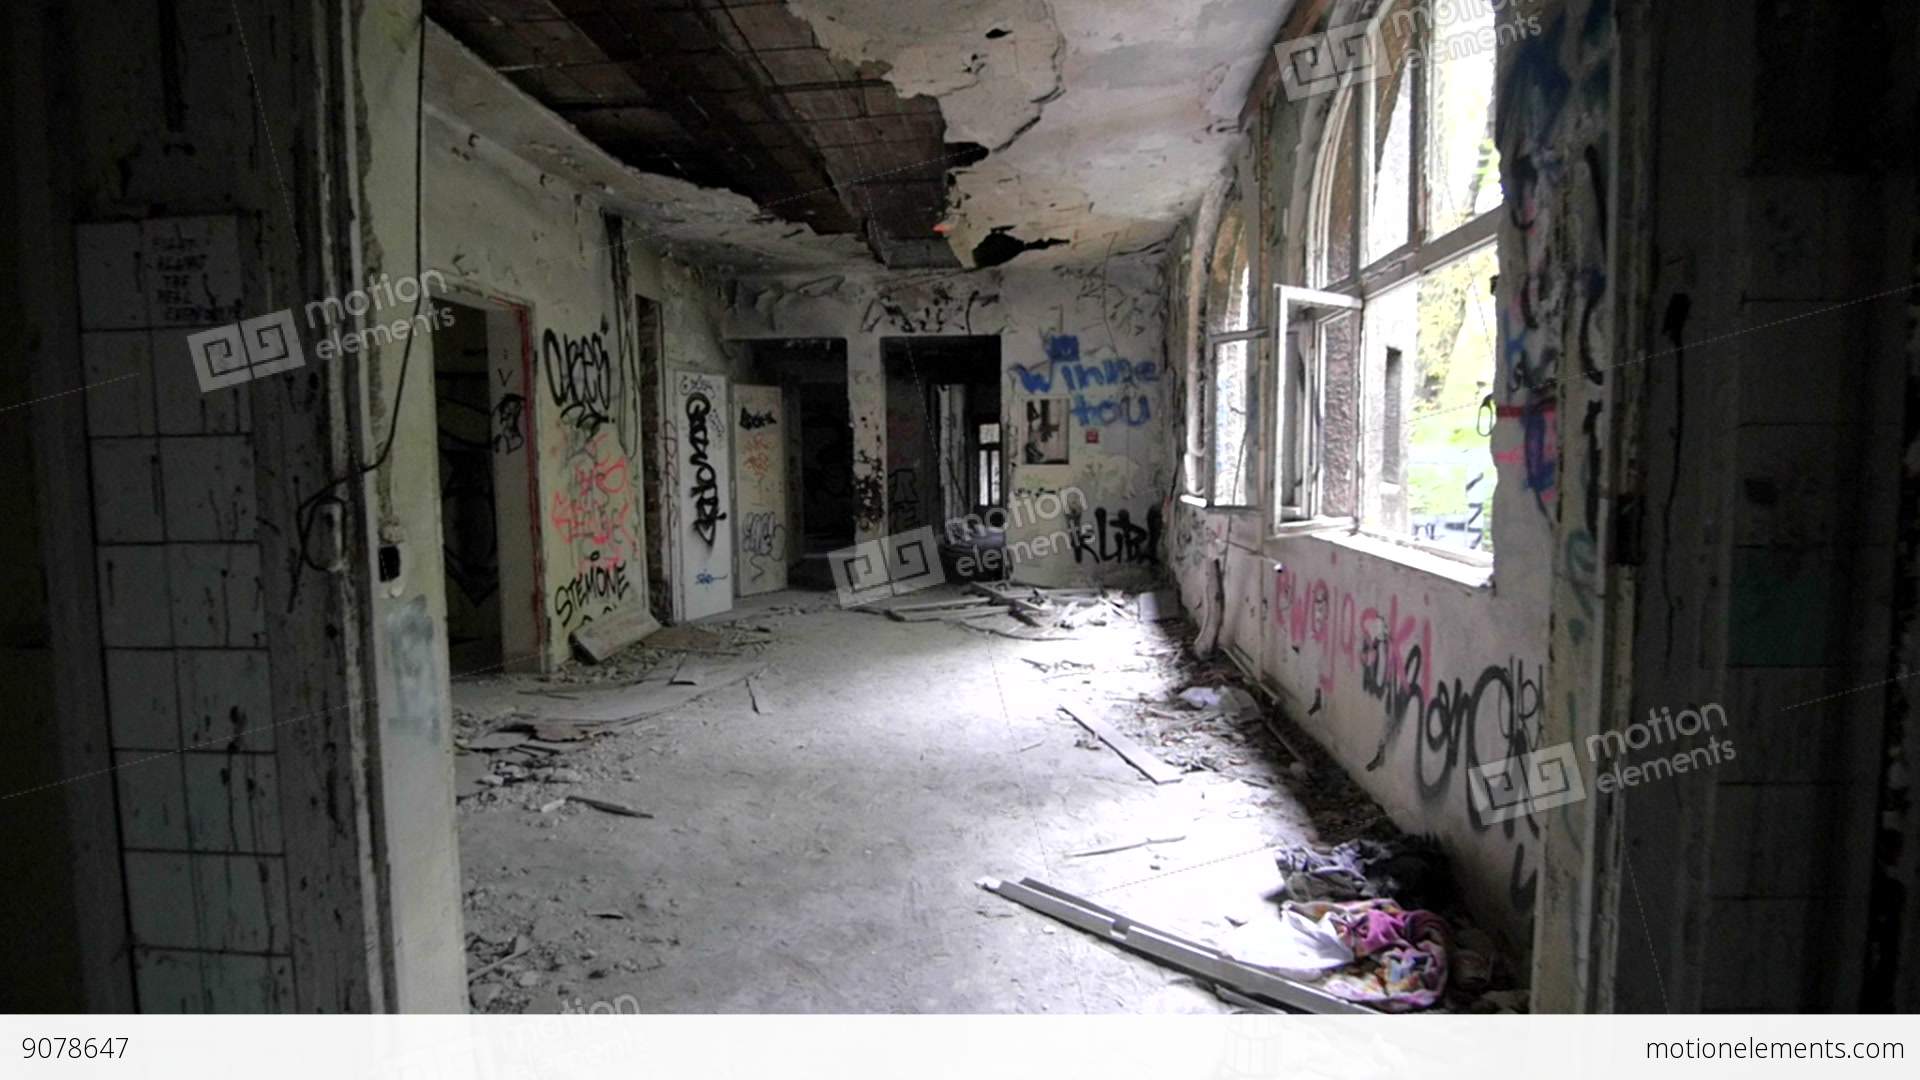 Slow Motion Of Walking Through Abandoned Building With Graffiti ...